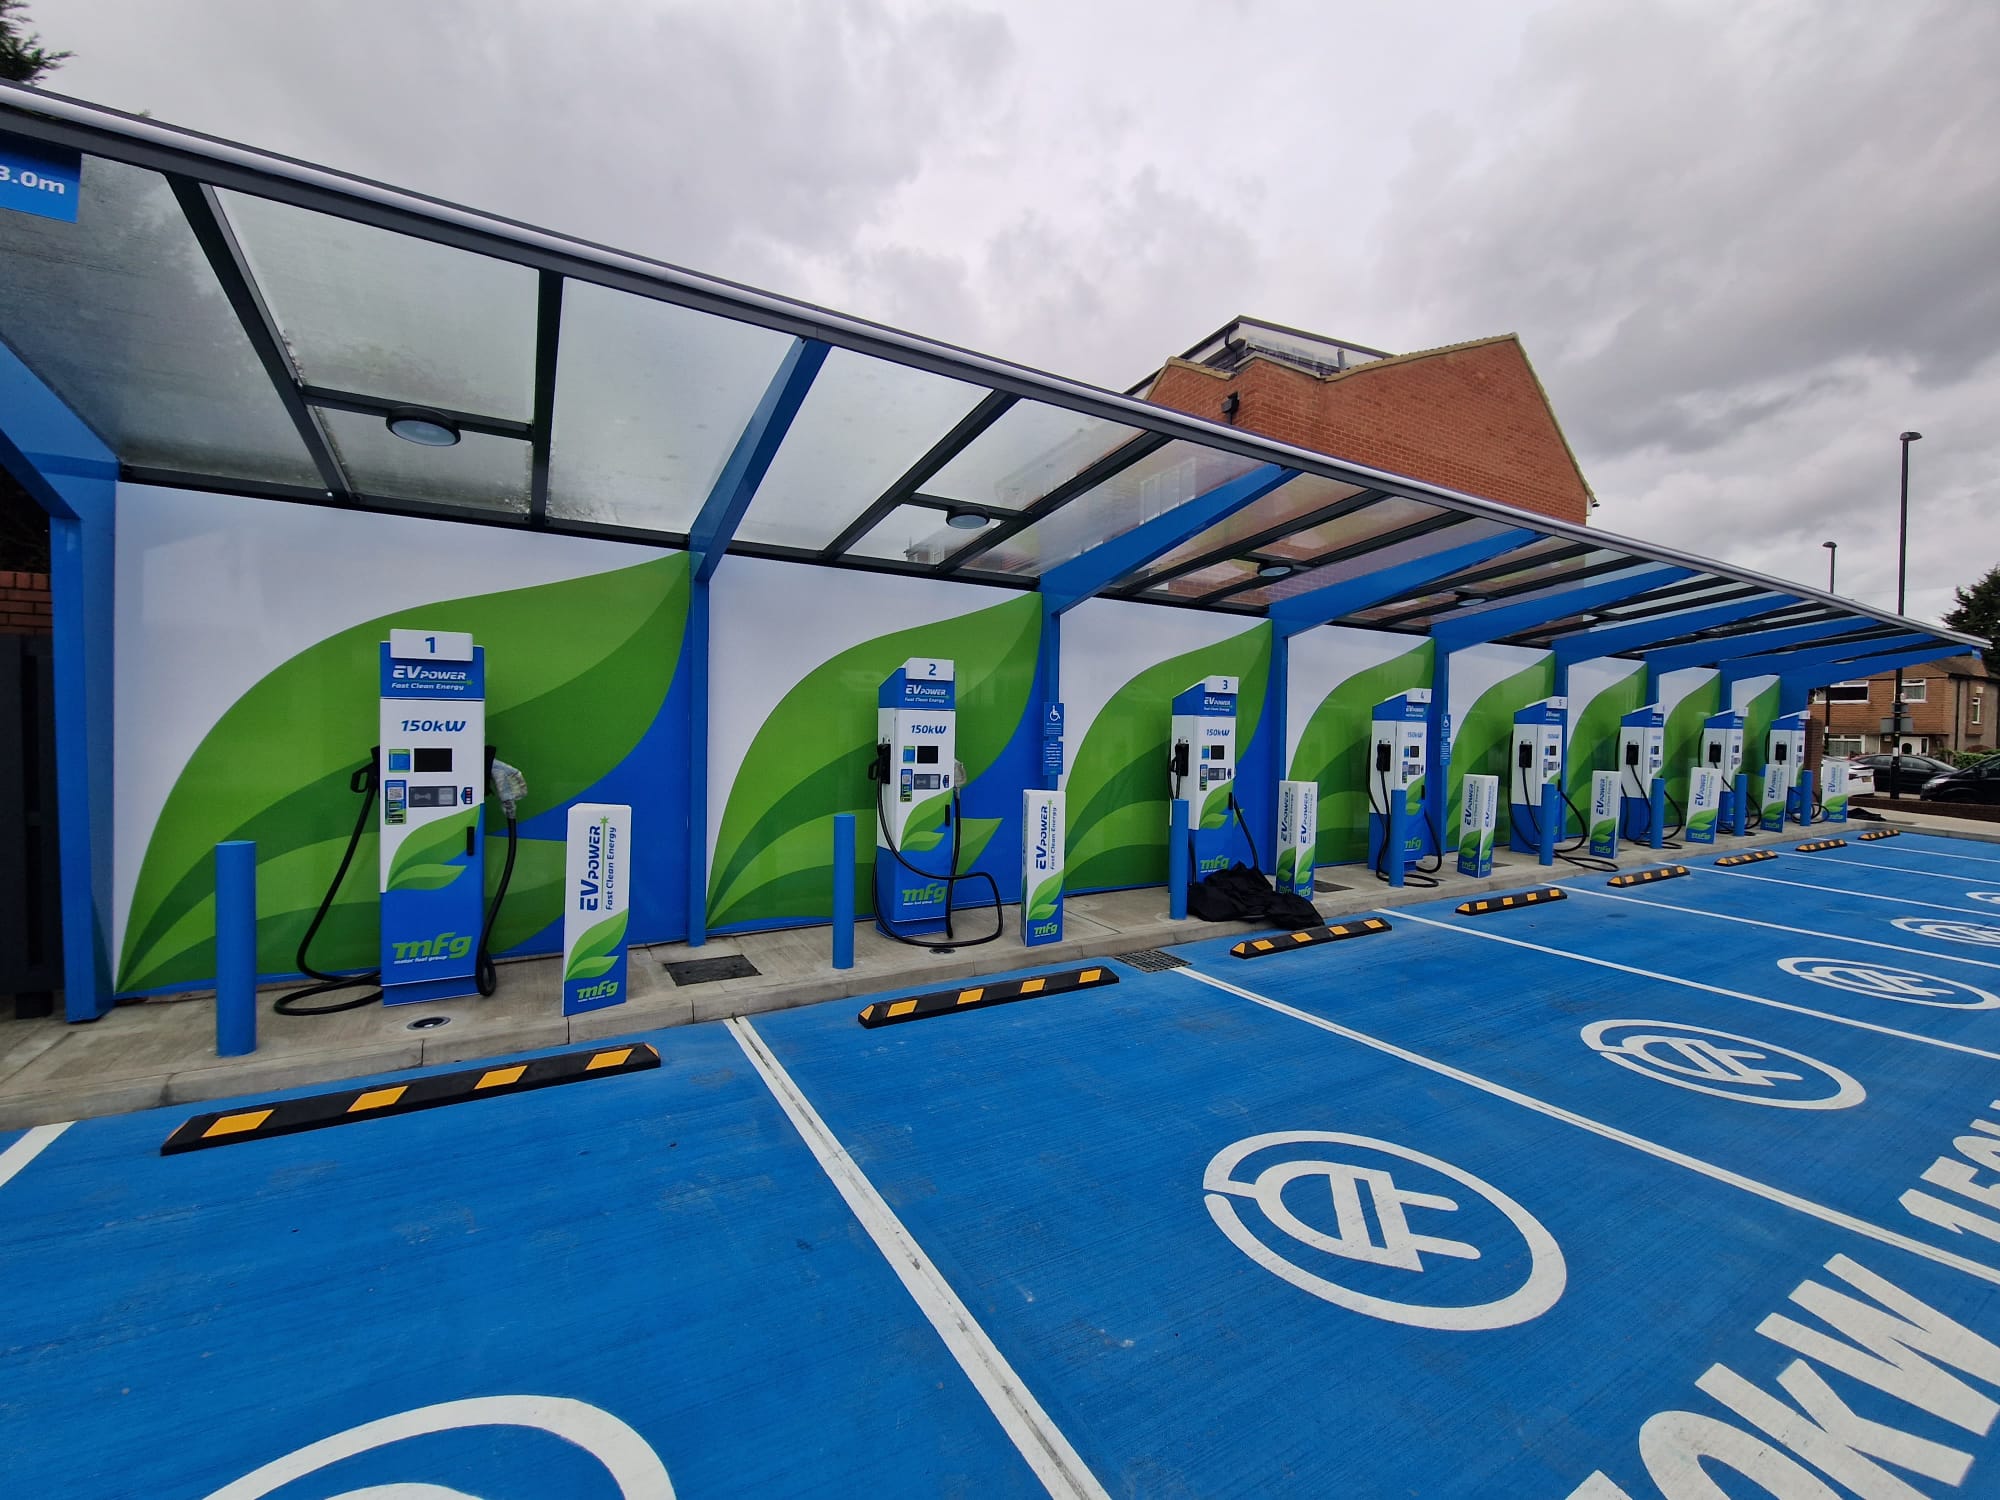 MFG’s Catford site in Southeast London has eight 150kW chargers